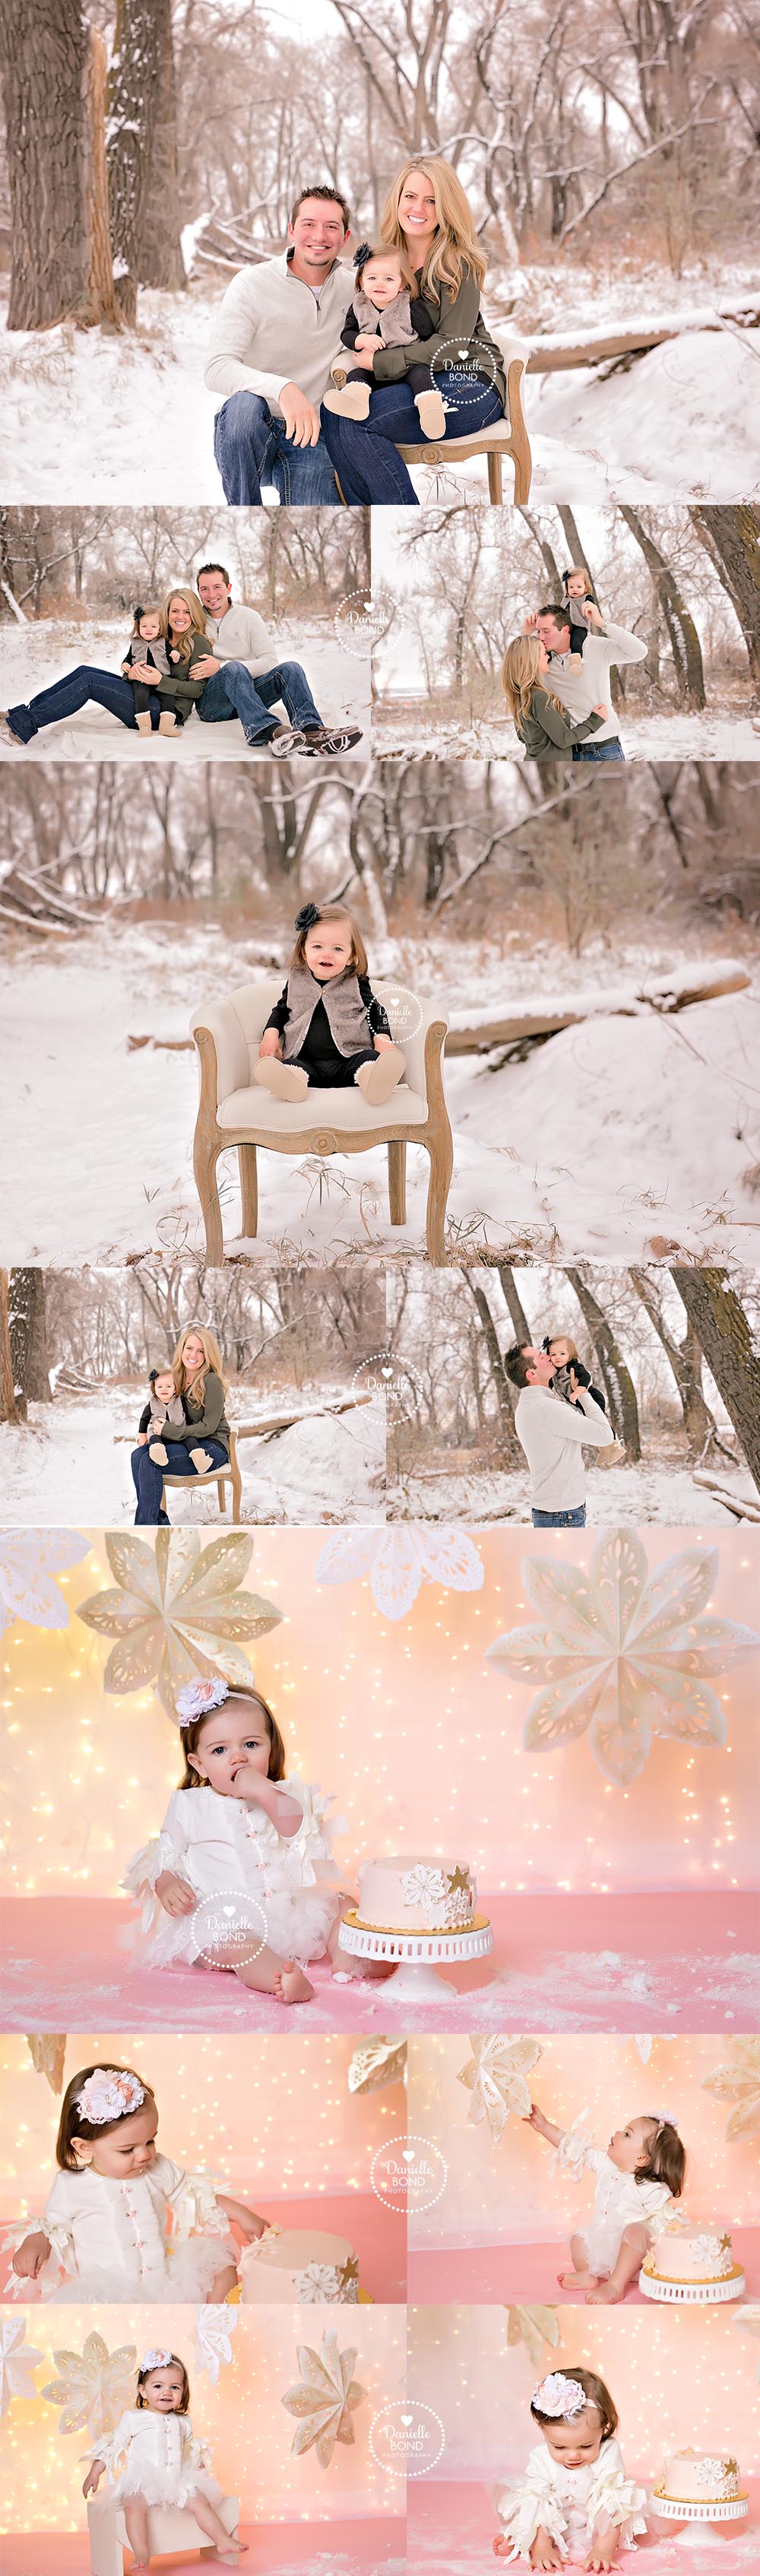 snowy family photos and winter wonderland cake smash by Denver, CO photographer